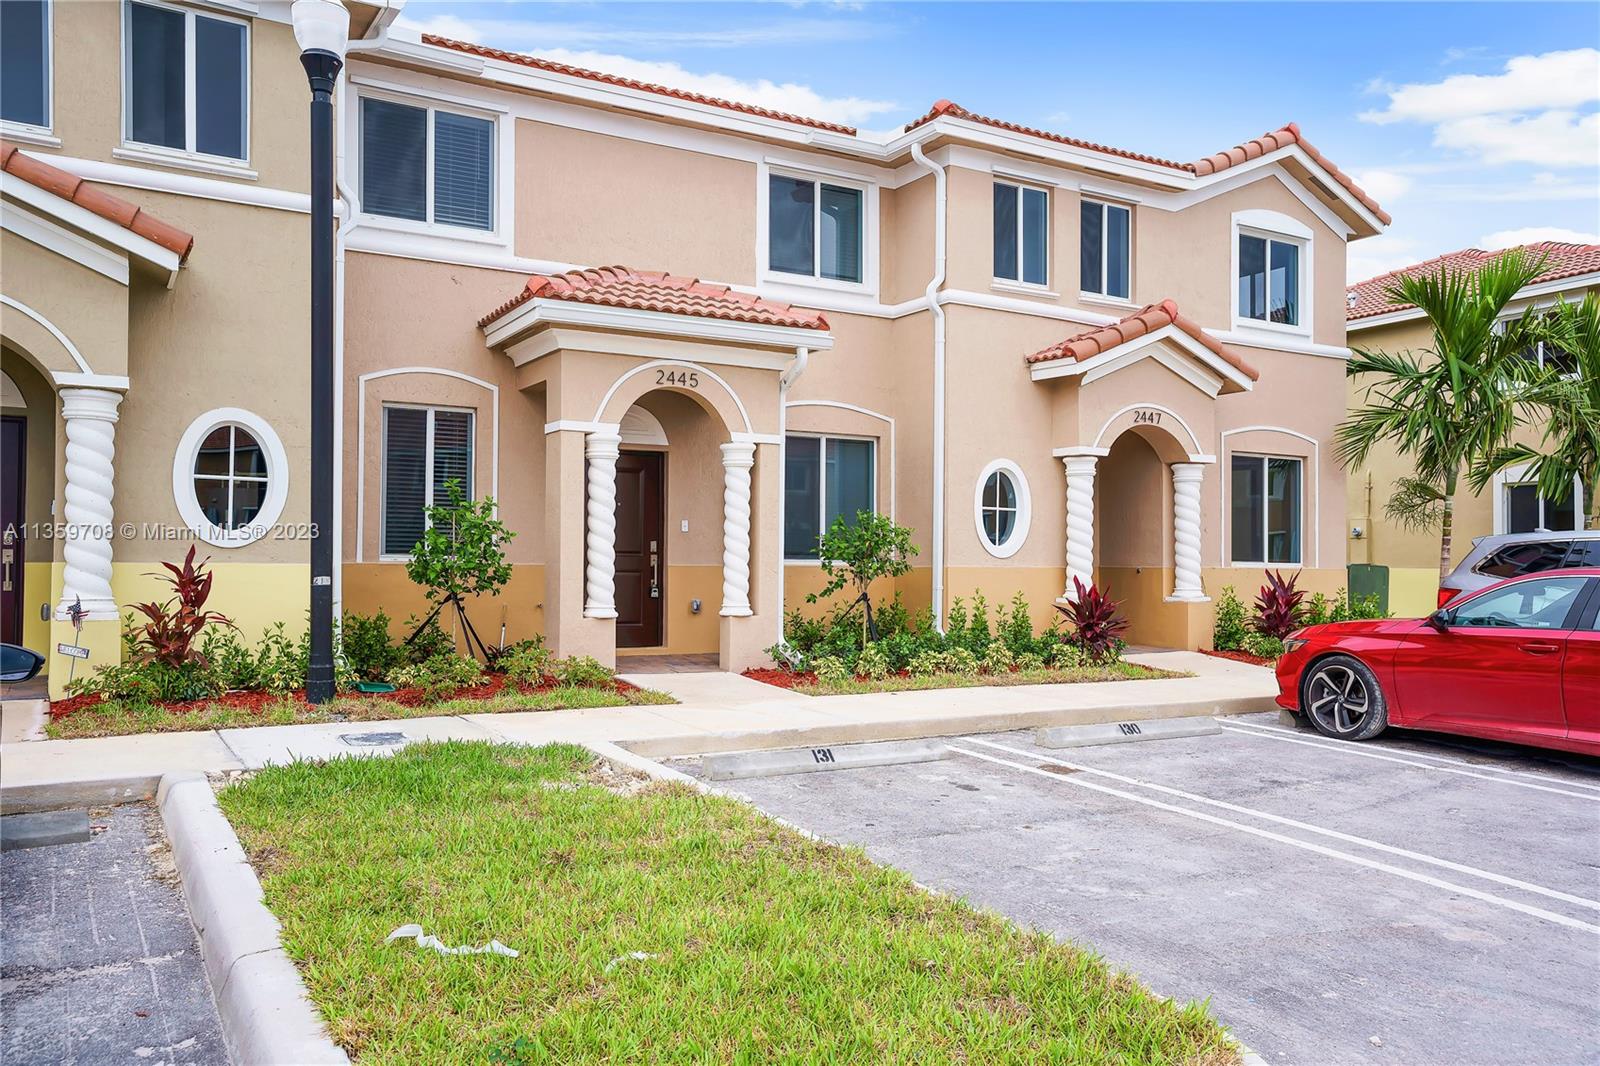 Gorgeous 2 story townhouse at Seascape. Features laundry room, tile floors, guest bathroom, window treatments, hurricane panels, modern appliances, spacious kitchen, backyard, nice sized rooms, walk in closets, and everything like new!